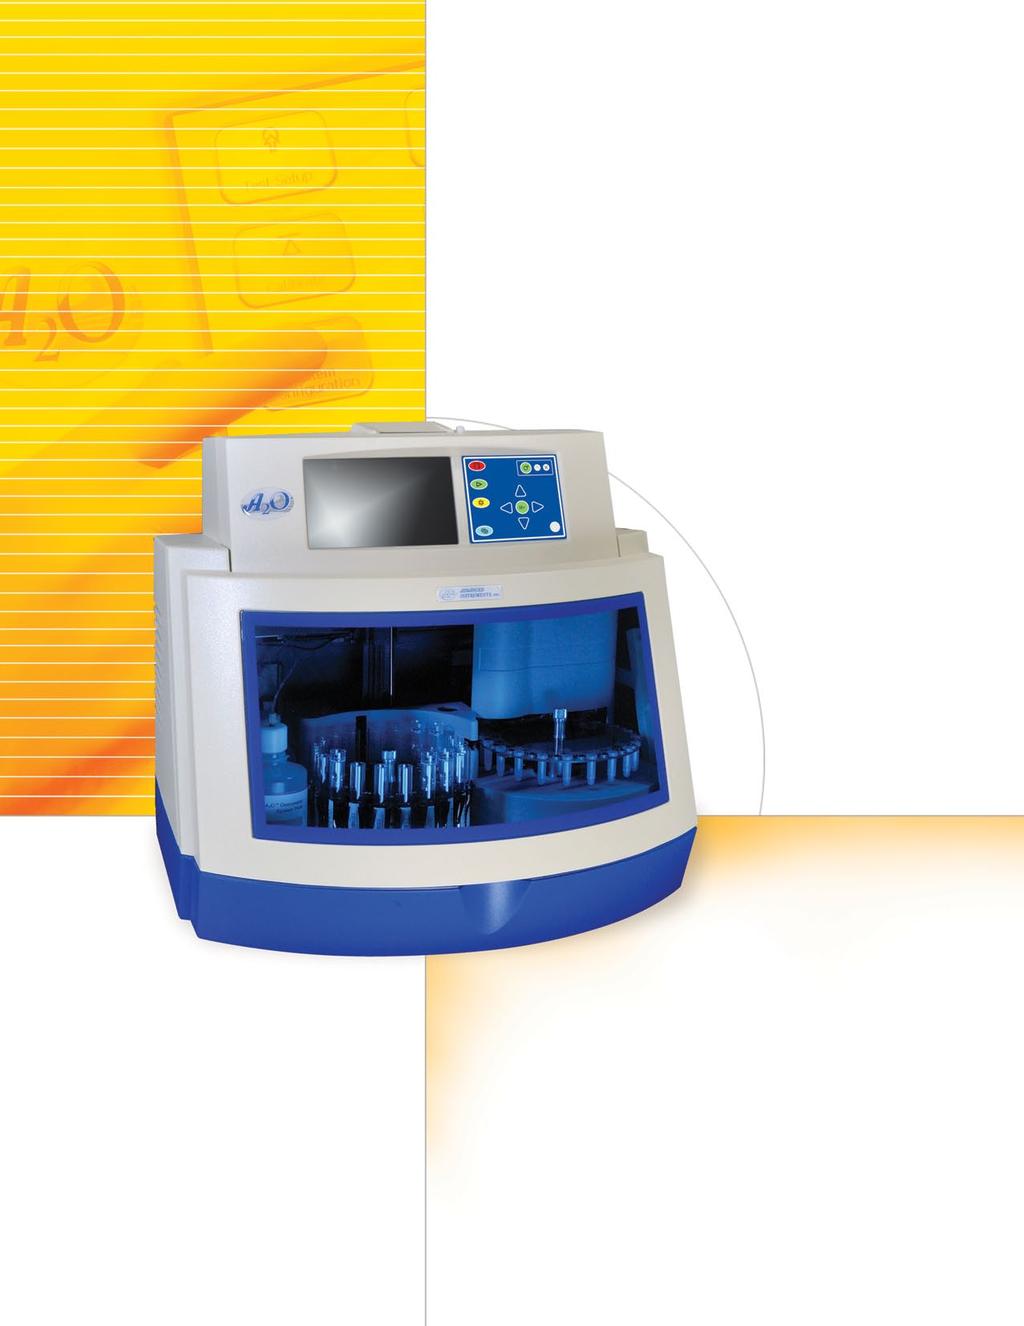 A 2 O Advanced Automated Osmometer A fully automated, multi-sample osmometer that sets the new